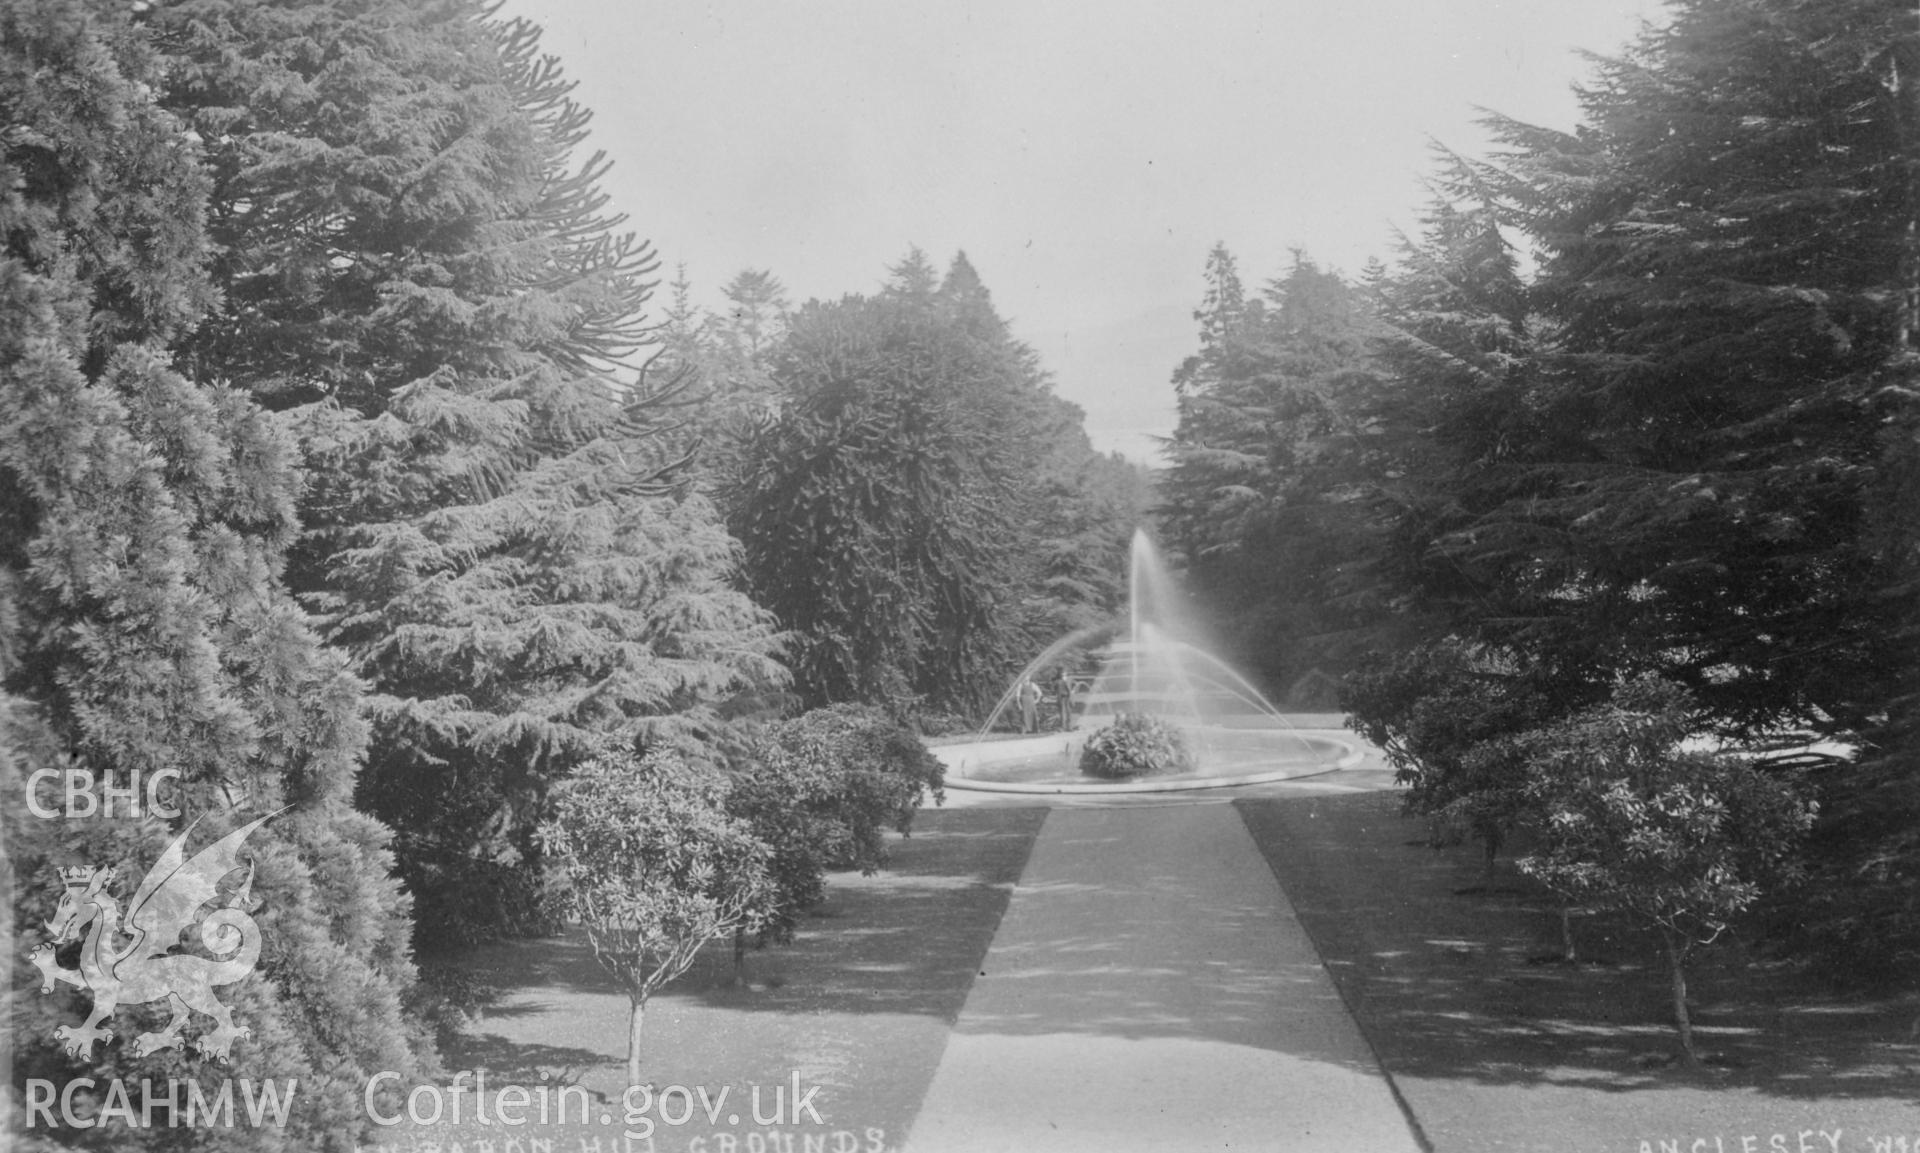 Black and white print of Baron Hill gardens, copied from a postcard lent by Thomas Lloyd. Negative held.